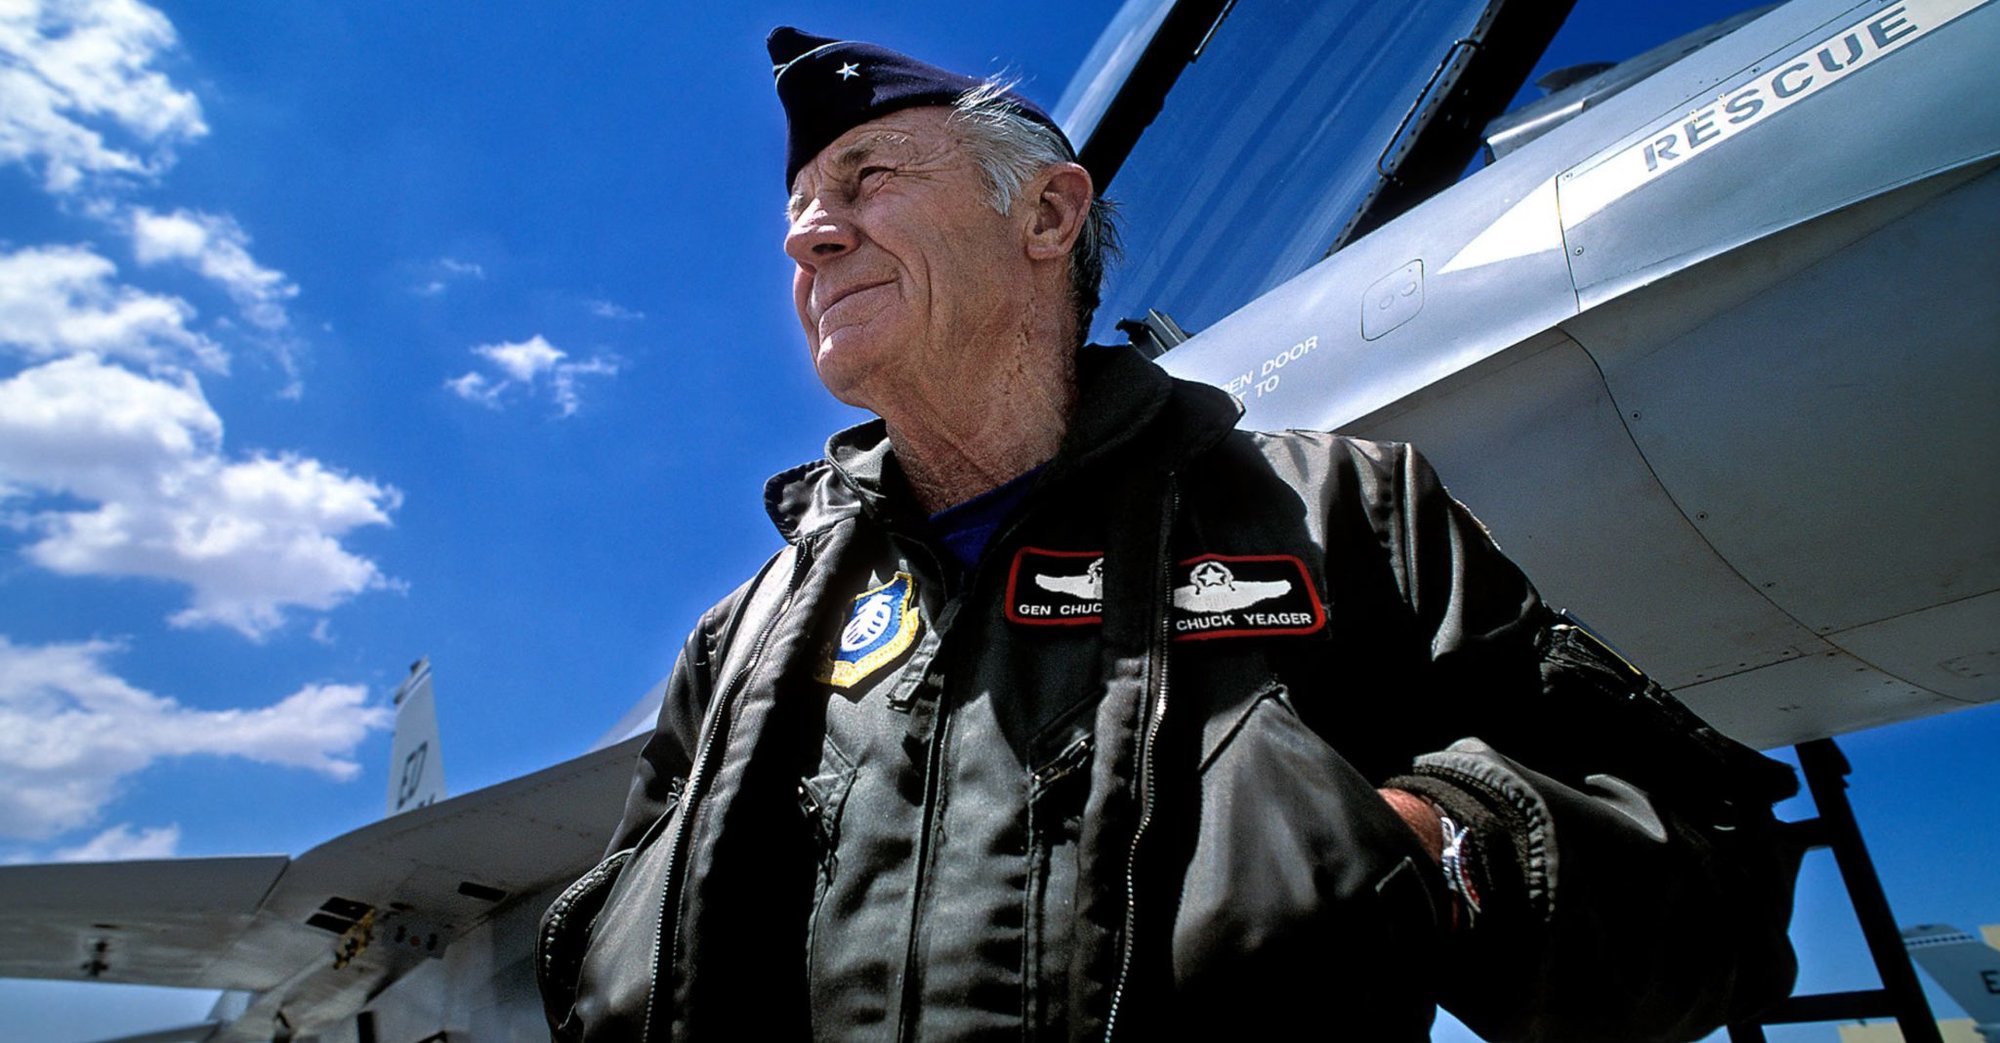 Chuck Yeager pilot